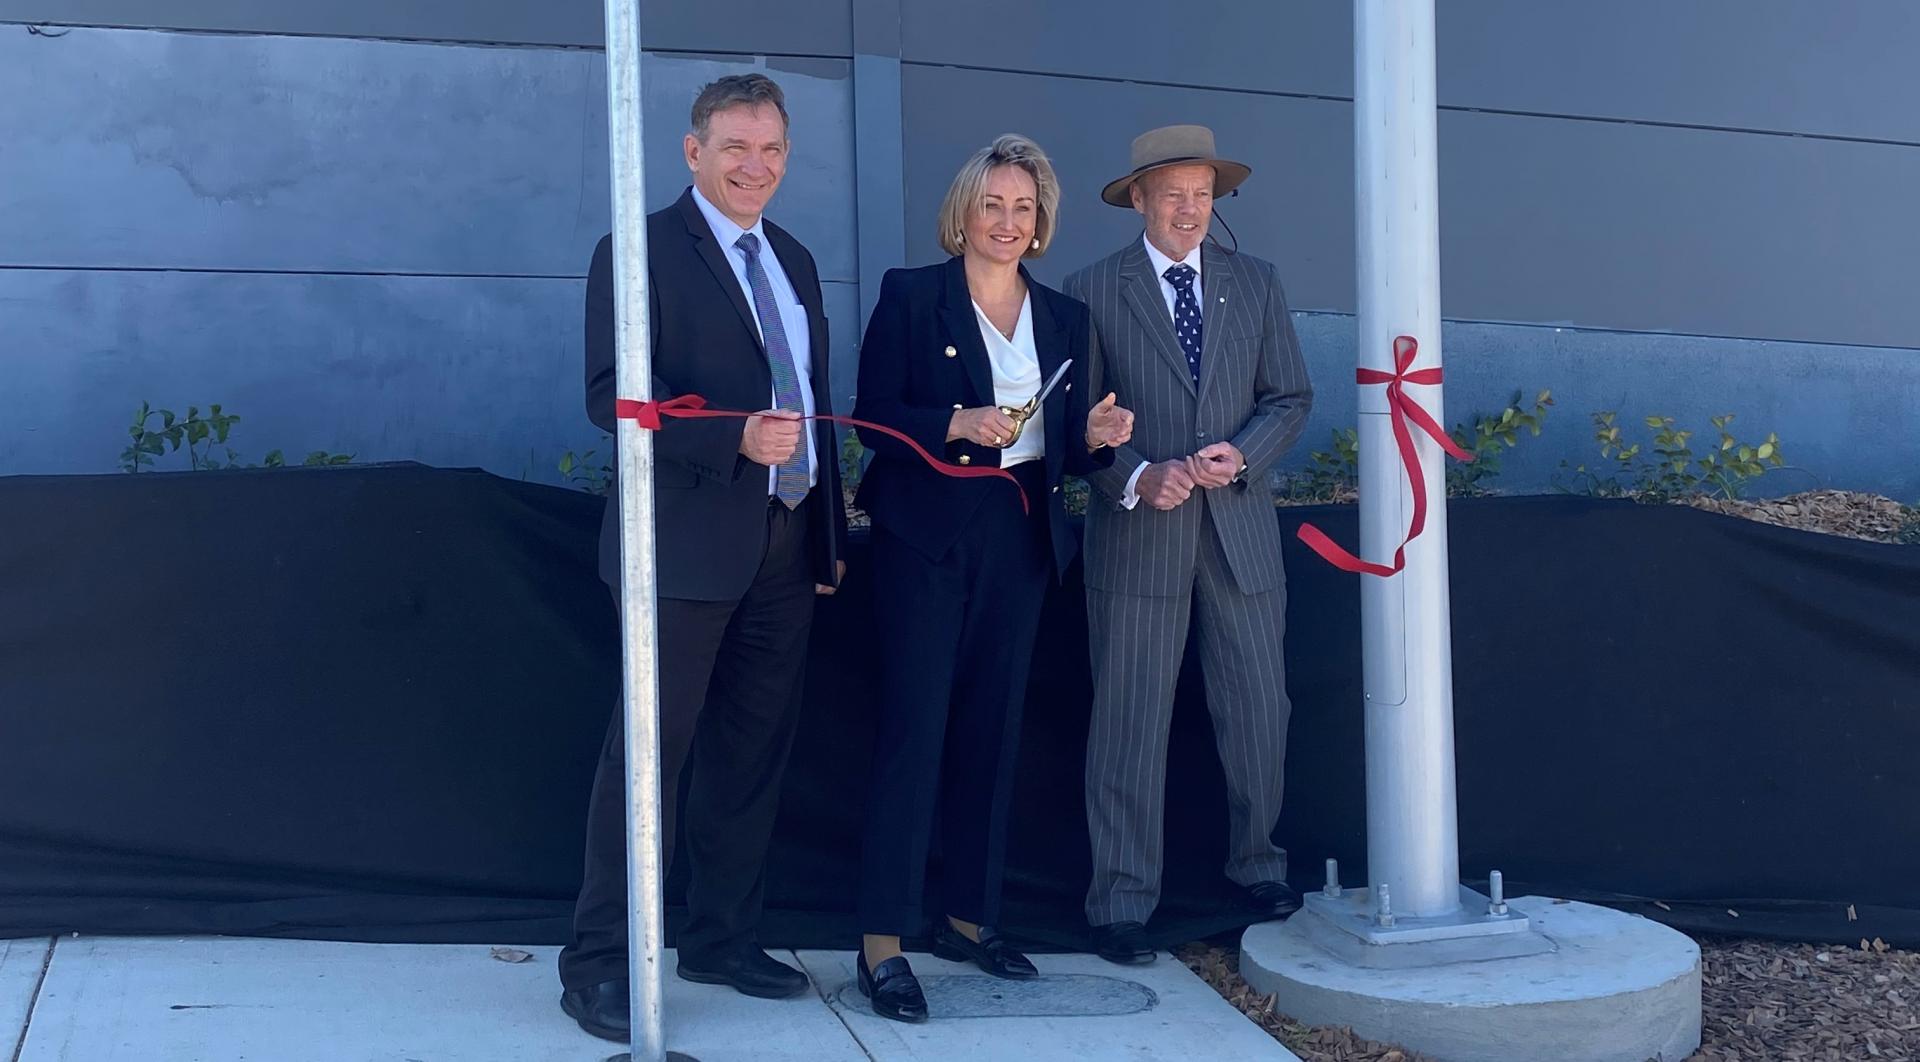 Parliamentary Secretary for Transport, Dr Marjorie O’Neil and Member for Blacktown, Mr Stephen Bali cutting the ribbon